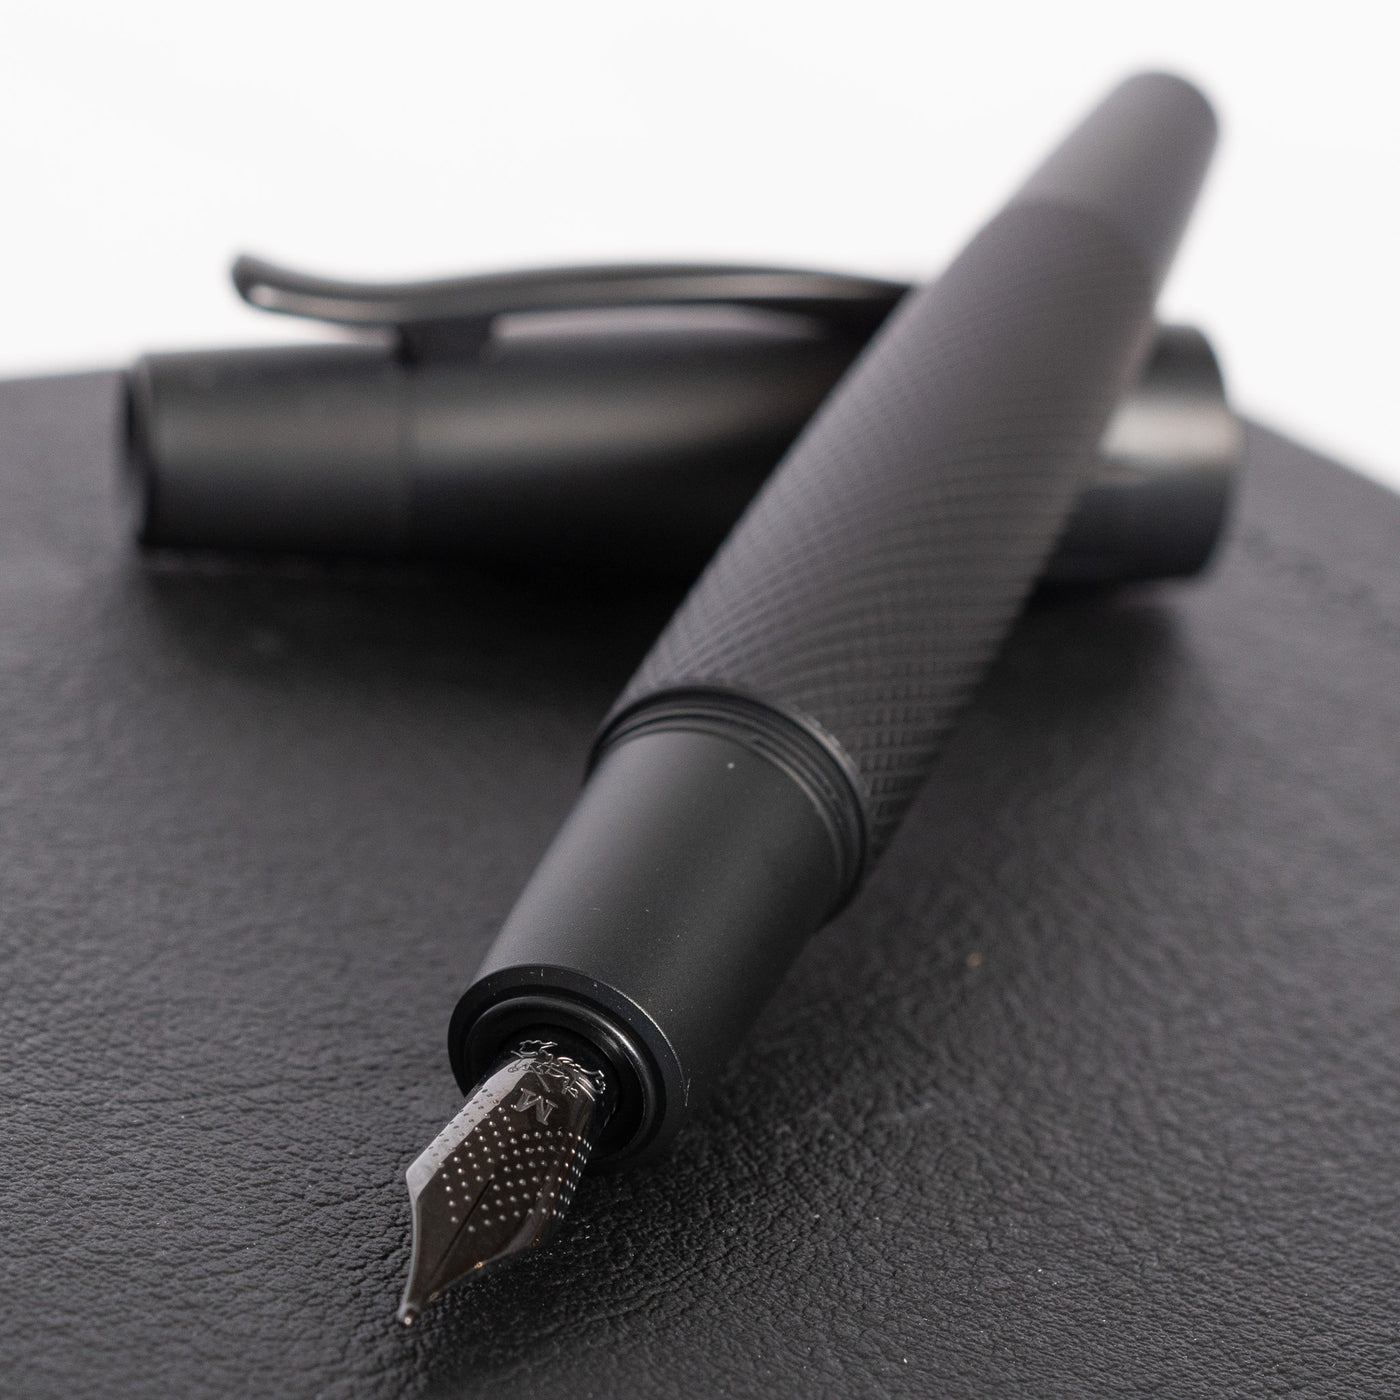 Faber-Castell E-Motion Pure Black Fountain Pen stainless steel nib